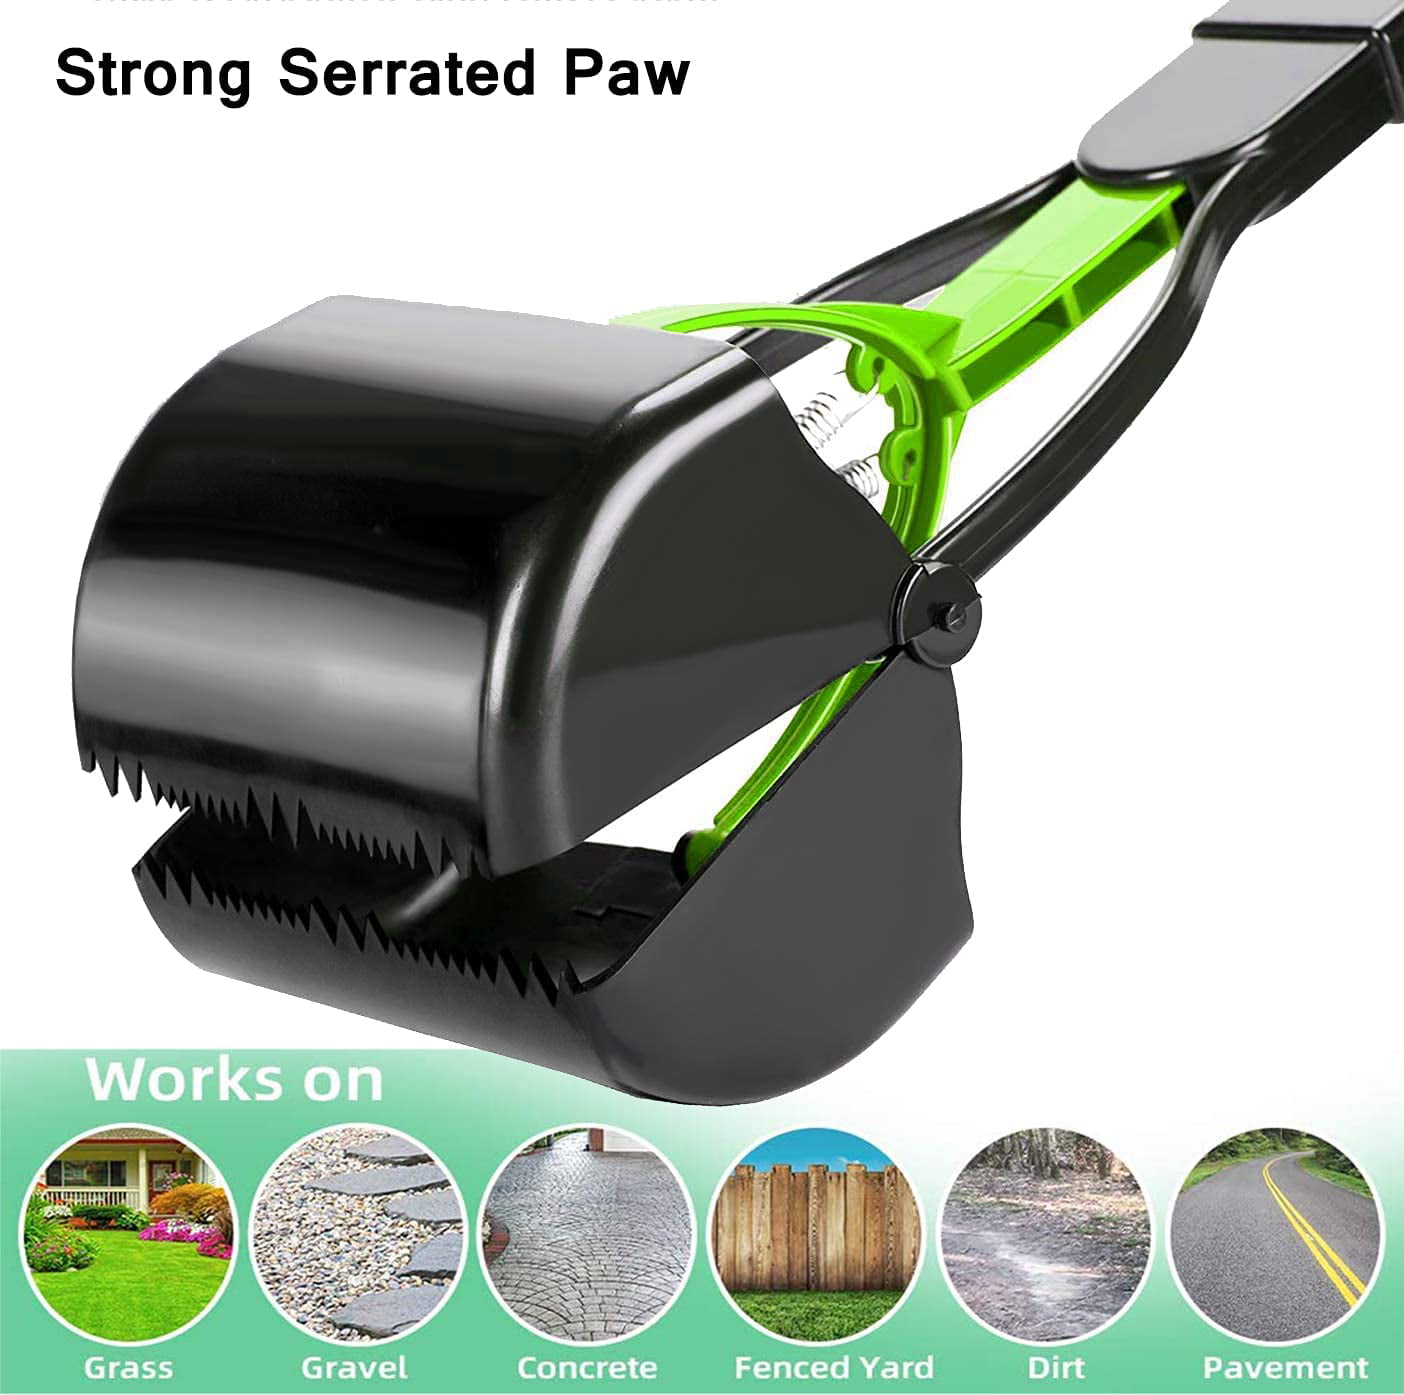 Leaves and Gravel Ideal for Grass Waste Pick Up Tool with High Strength Material and Durable Spring Dirt WINSOME Dog Pooper Scooper Long Handle Poop Scoop for Pet 